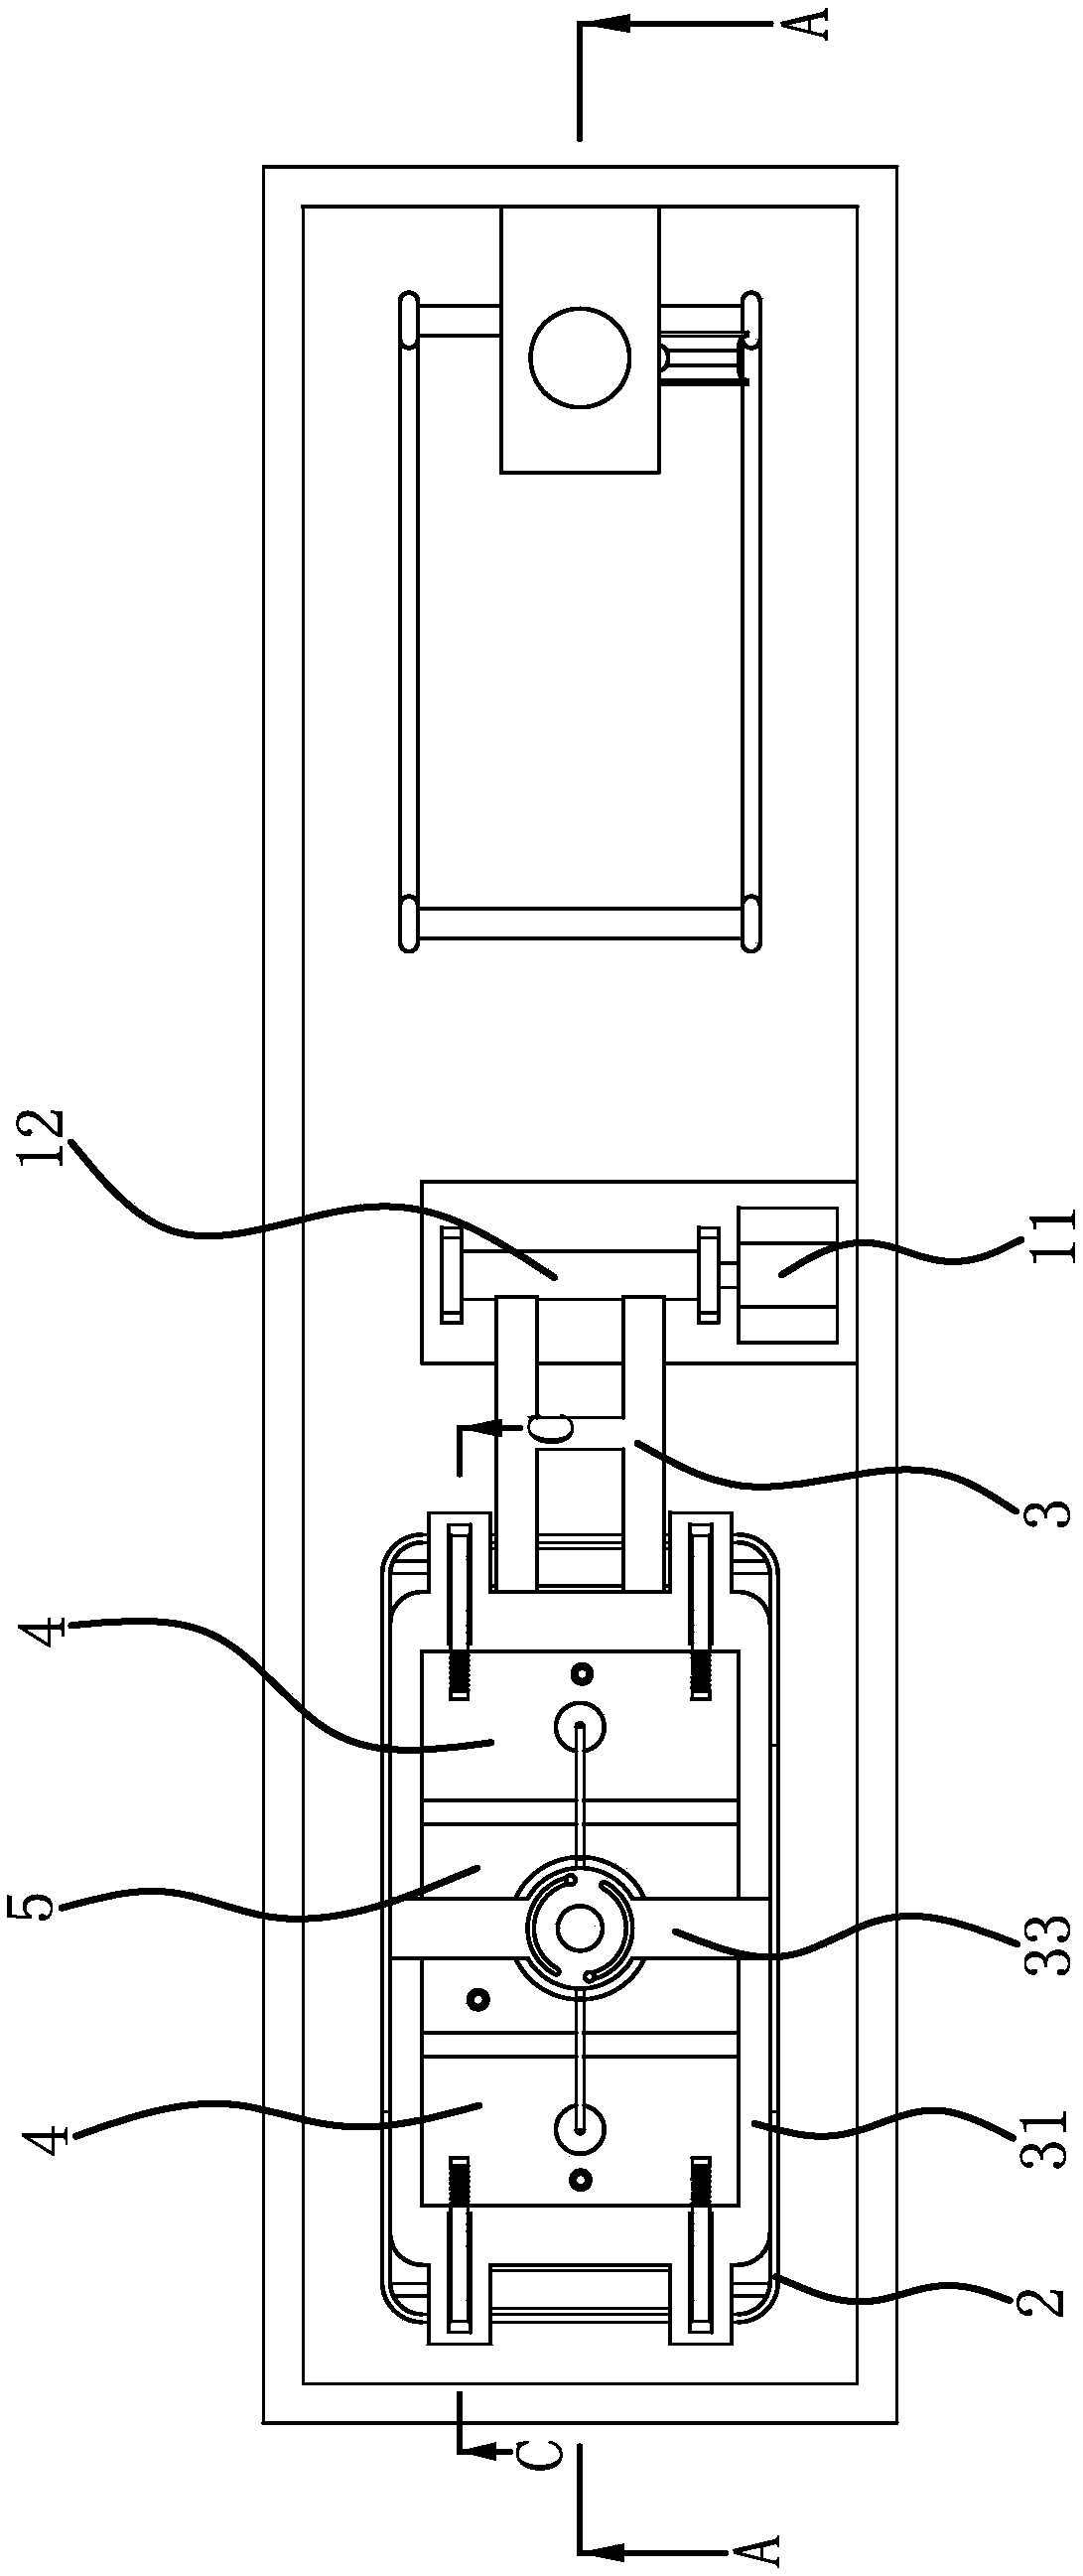 Locating device for flexible sheet